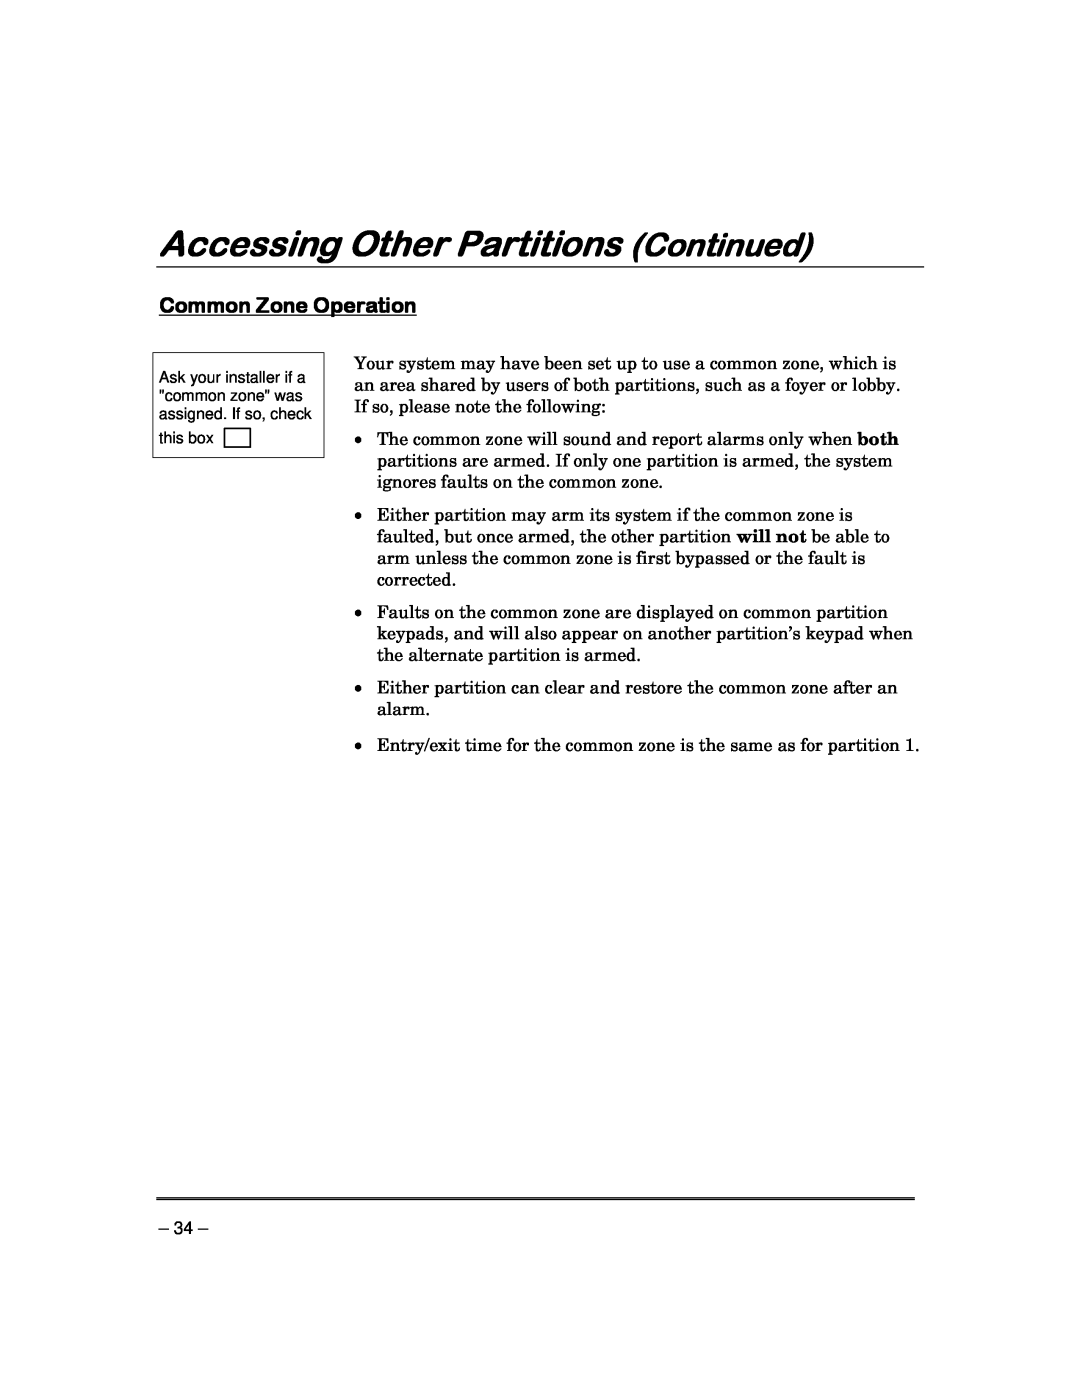 Garmin FA168CPS manual Common Zone Operation, Accessing Other Partitions Continued 